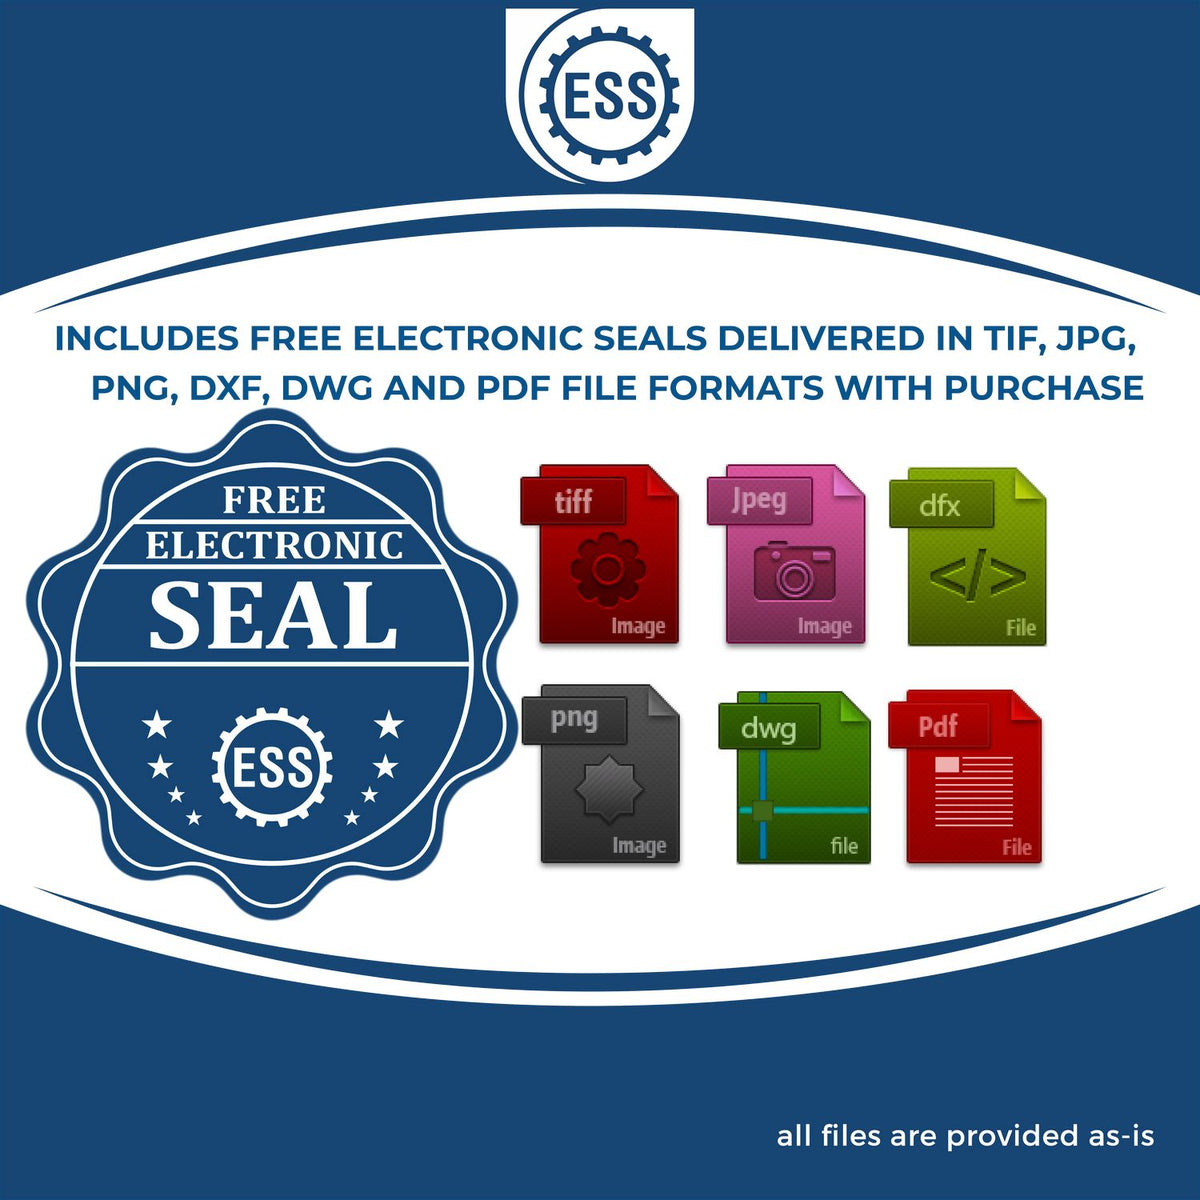 An infographic for the free electronic seal for the Self-Inking Kentucky Geologist Stamp illustrating the different file type icons such as DXF, DWG, TIF, JPG and PNG.